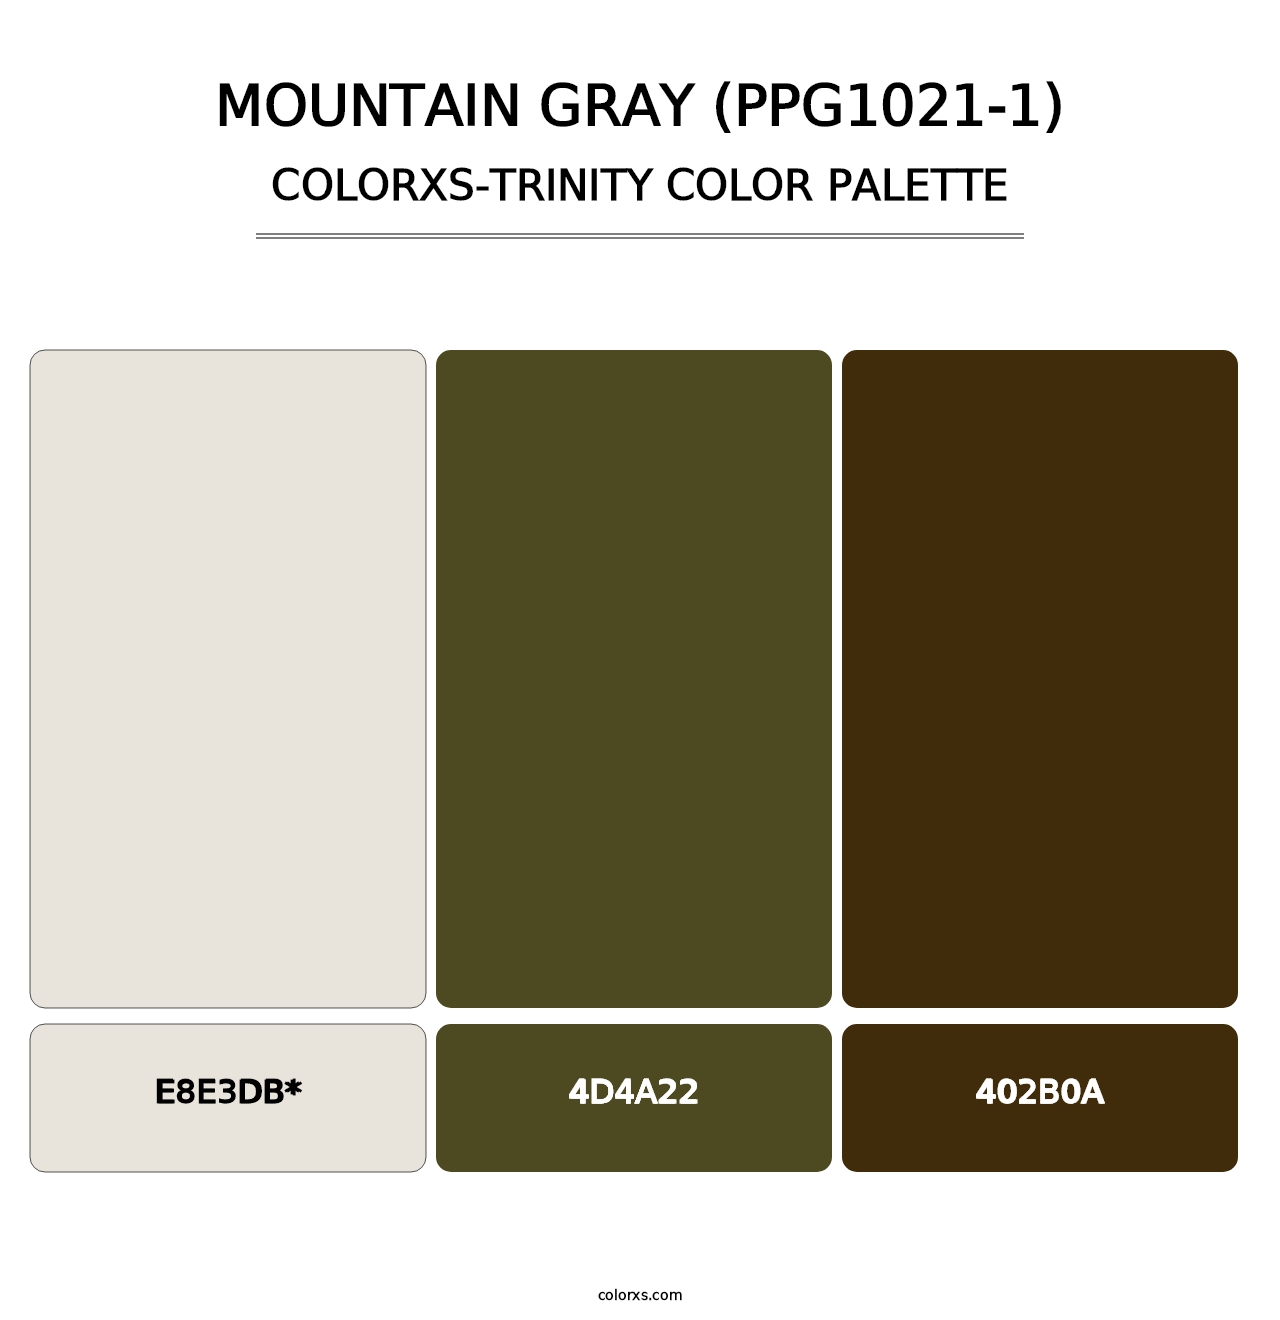 Mountain Gray (PPG1021-1) - Colorxs Trinity Palette